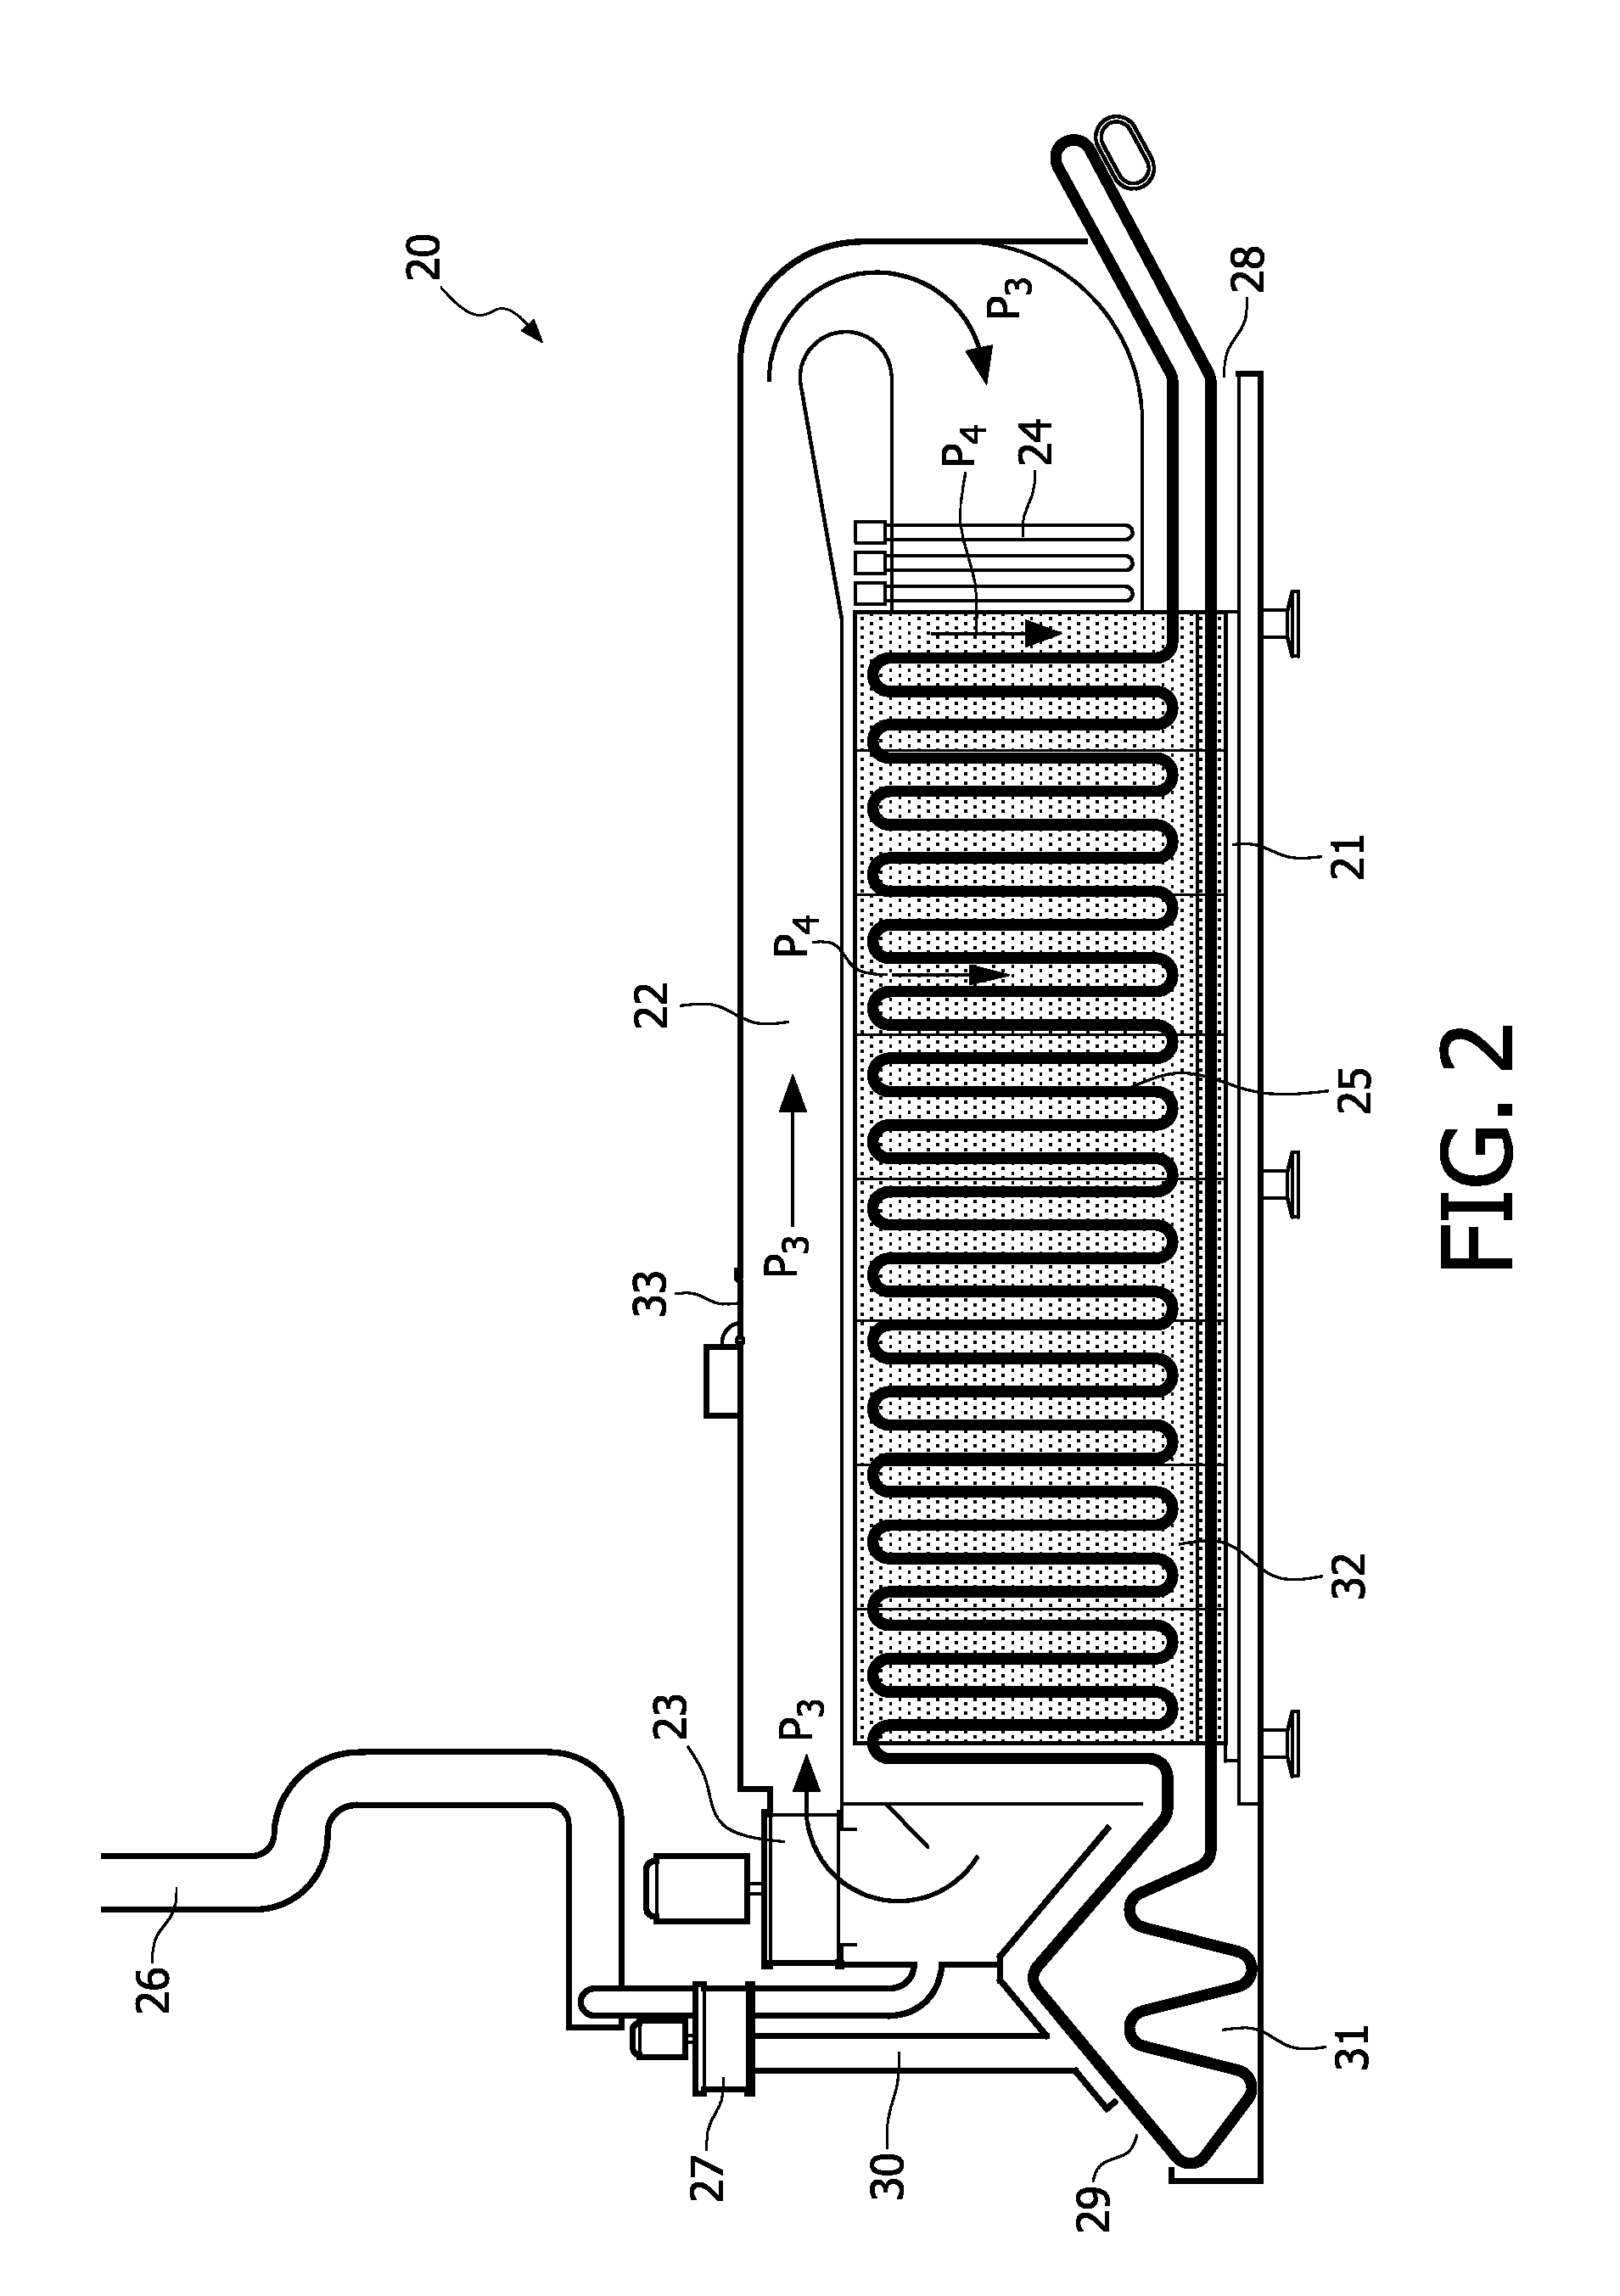 Device for treating elongate food products with a conditioned airflow